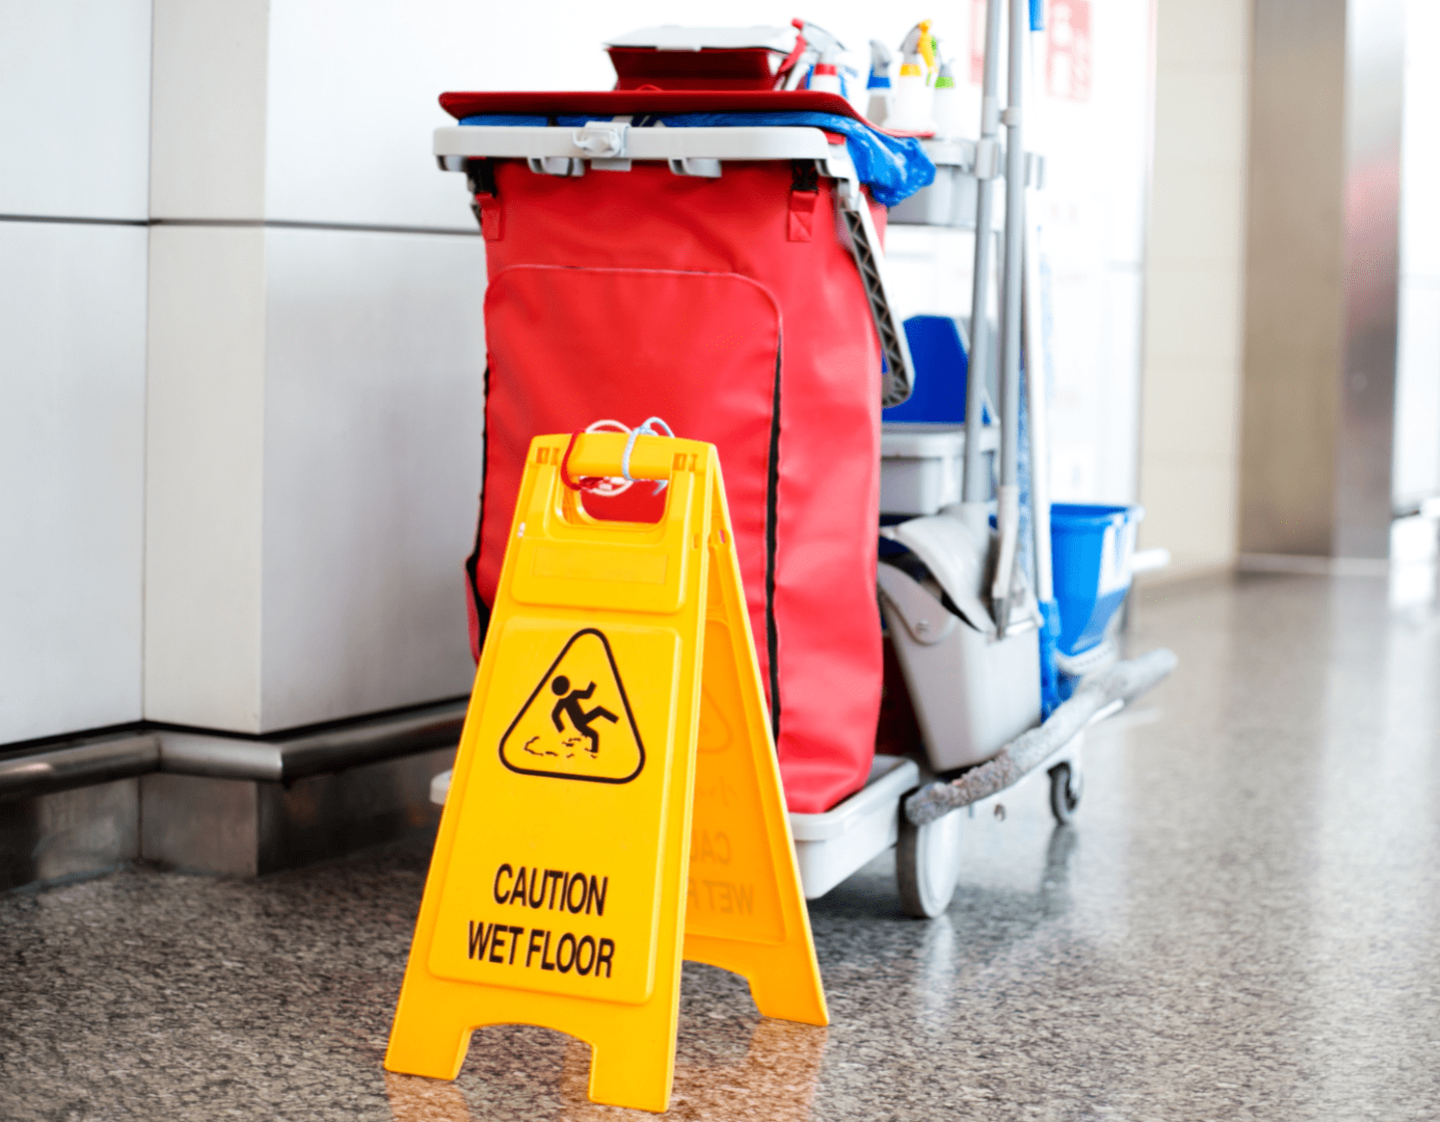 A cleaning cart with a wet-floor sign next to it